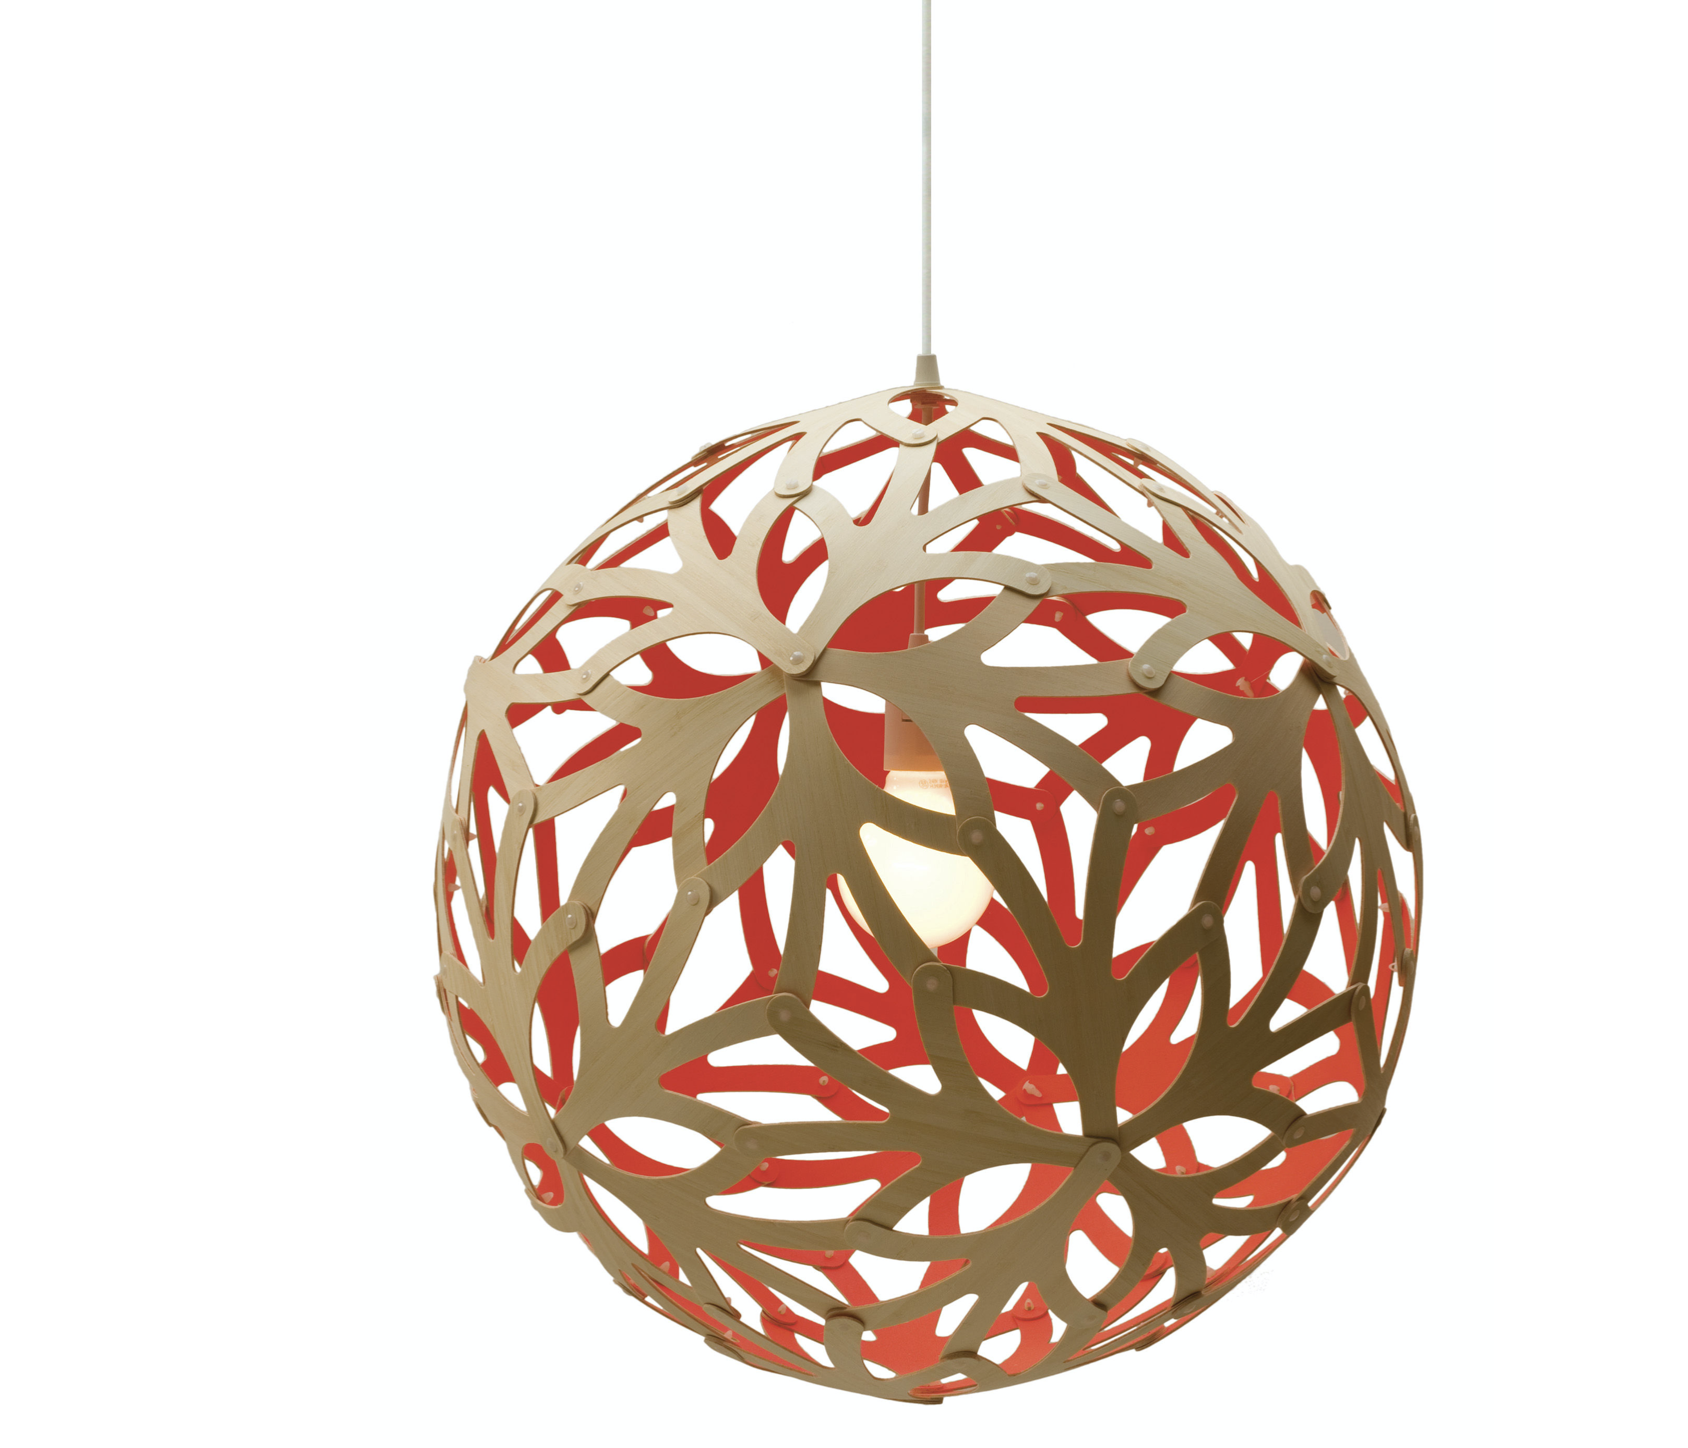 Floral Pendant made from wood, by New Zealand designer David Trubridge